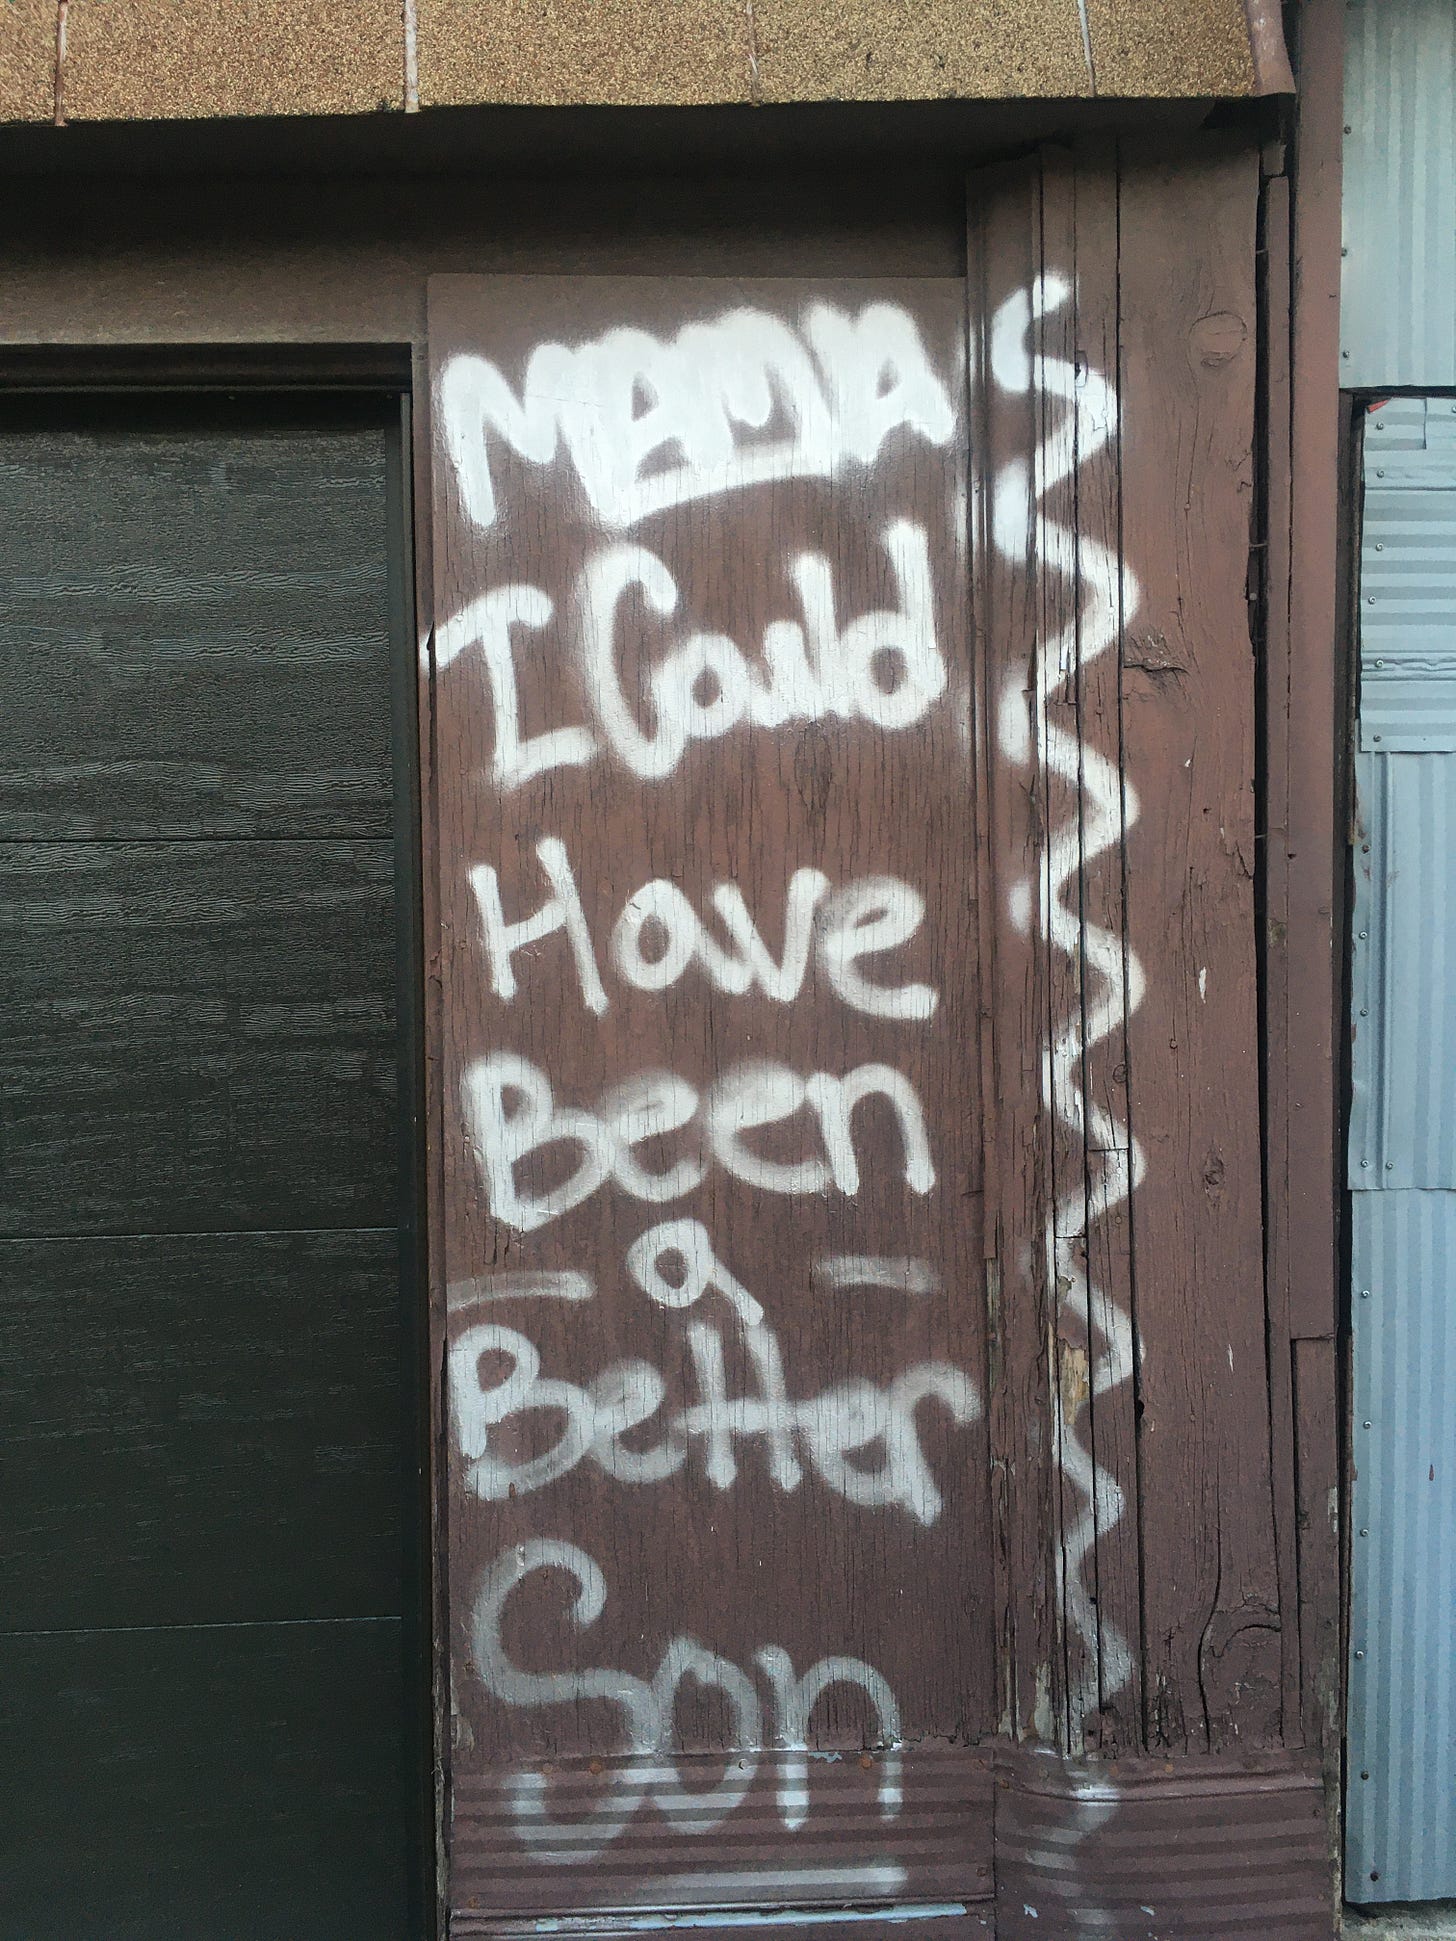 Graffiti on a wall reads "Mama, I could have been a better son".